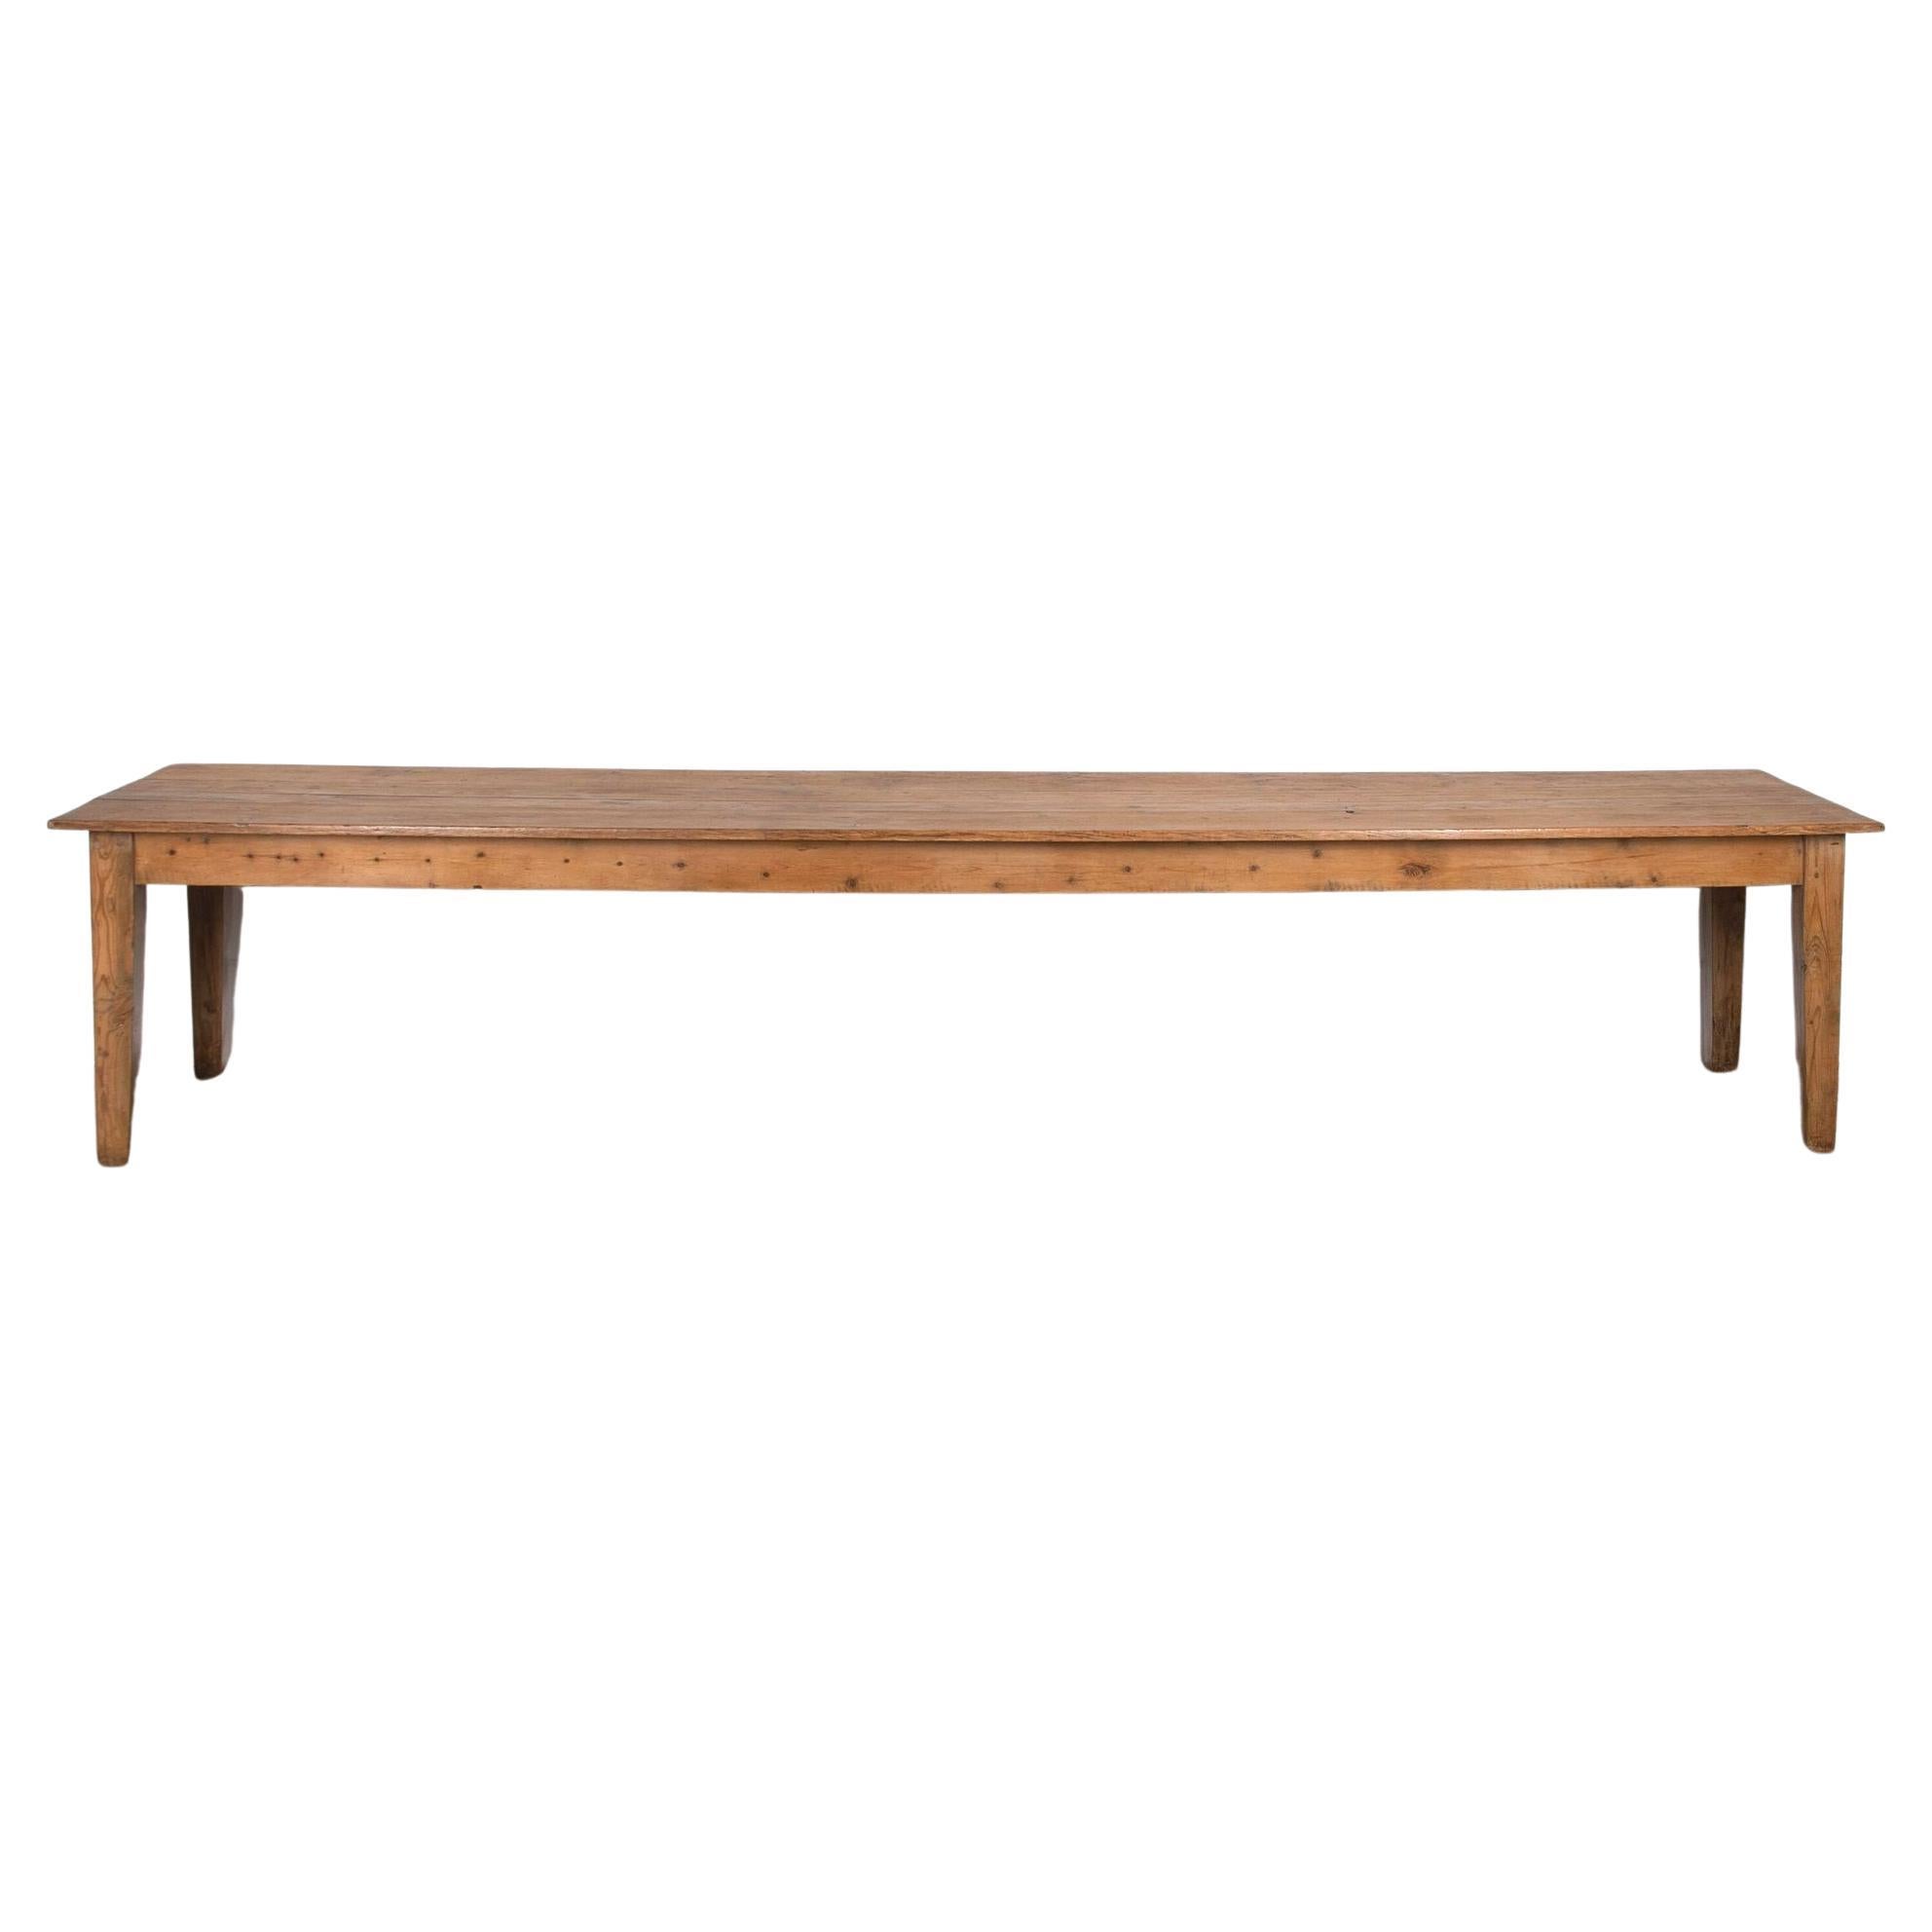 19th Century Pine Refectory Table